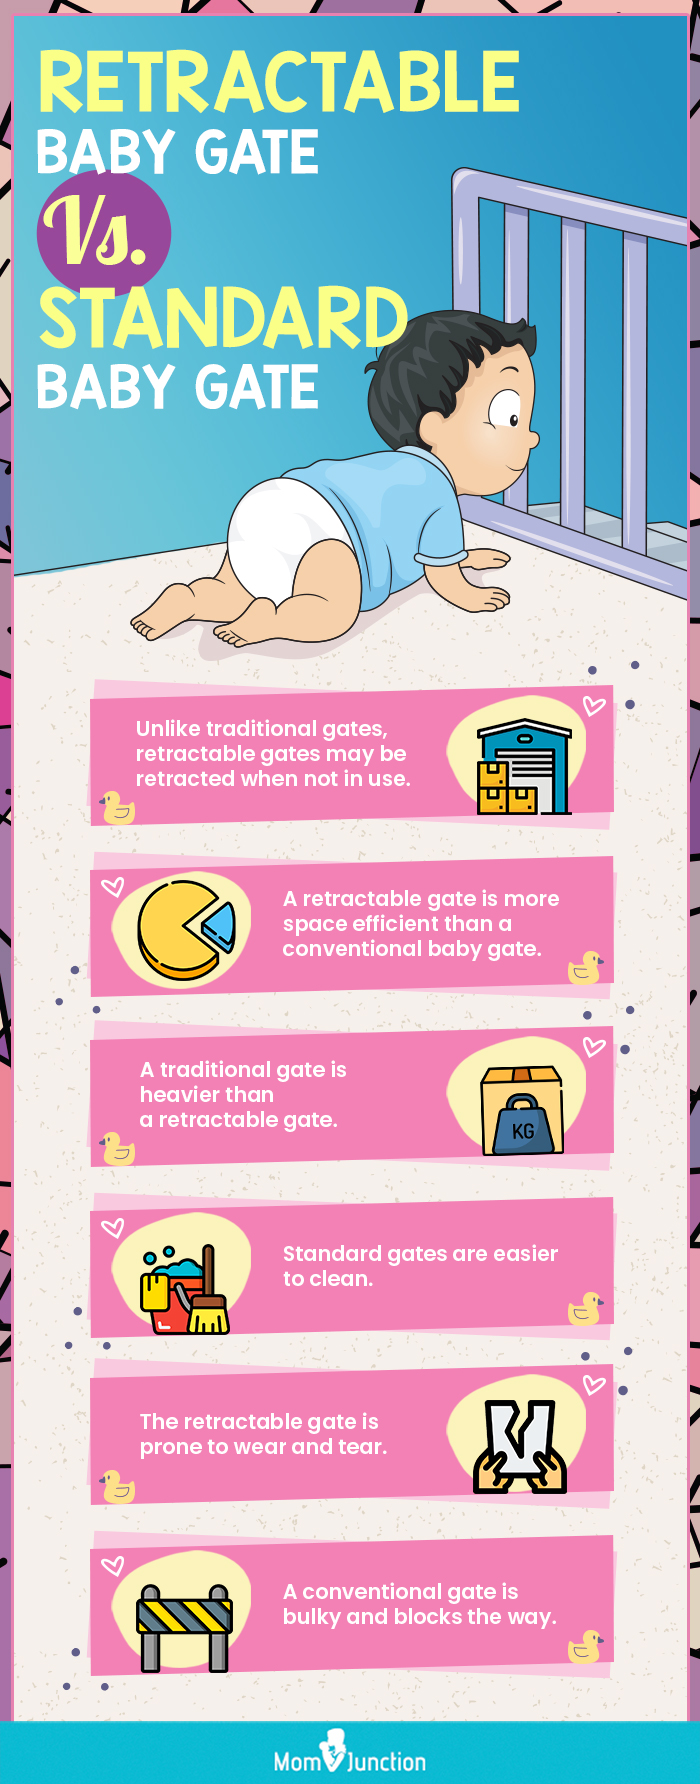 Retractable-Baby-Gate-Vs-Standard Baby Gate(infographic)